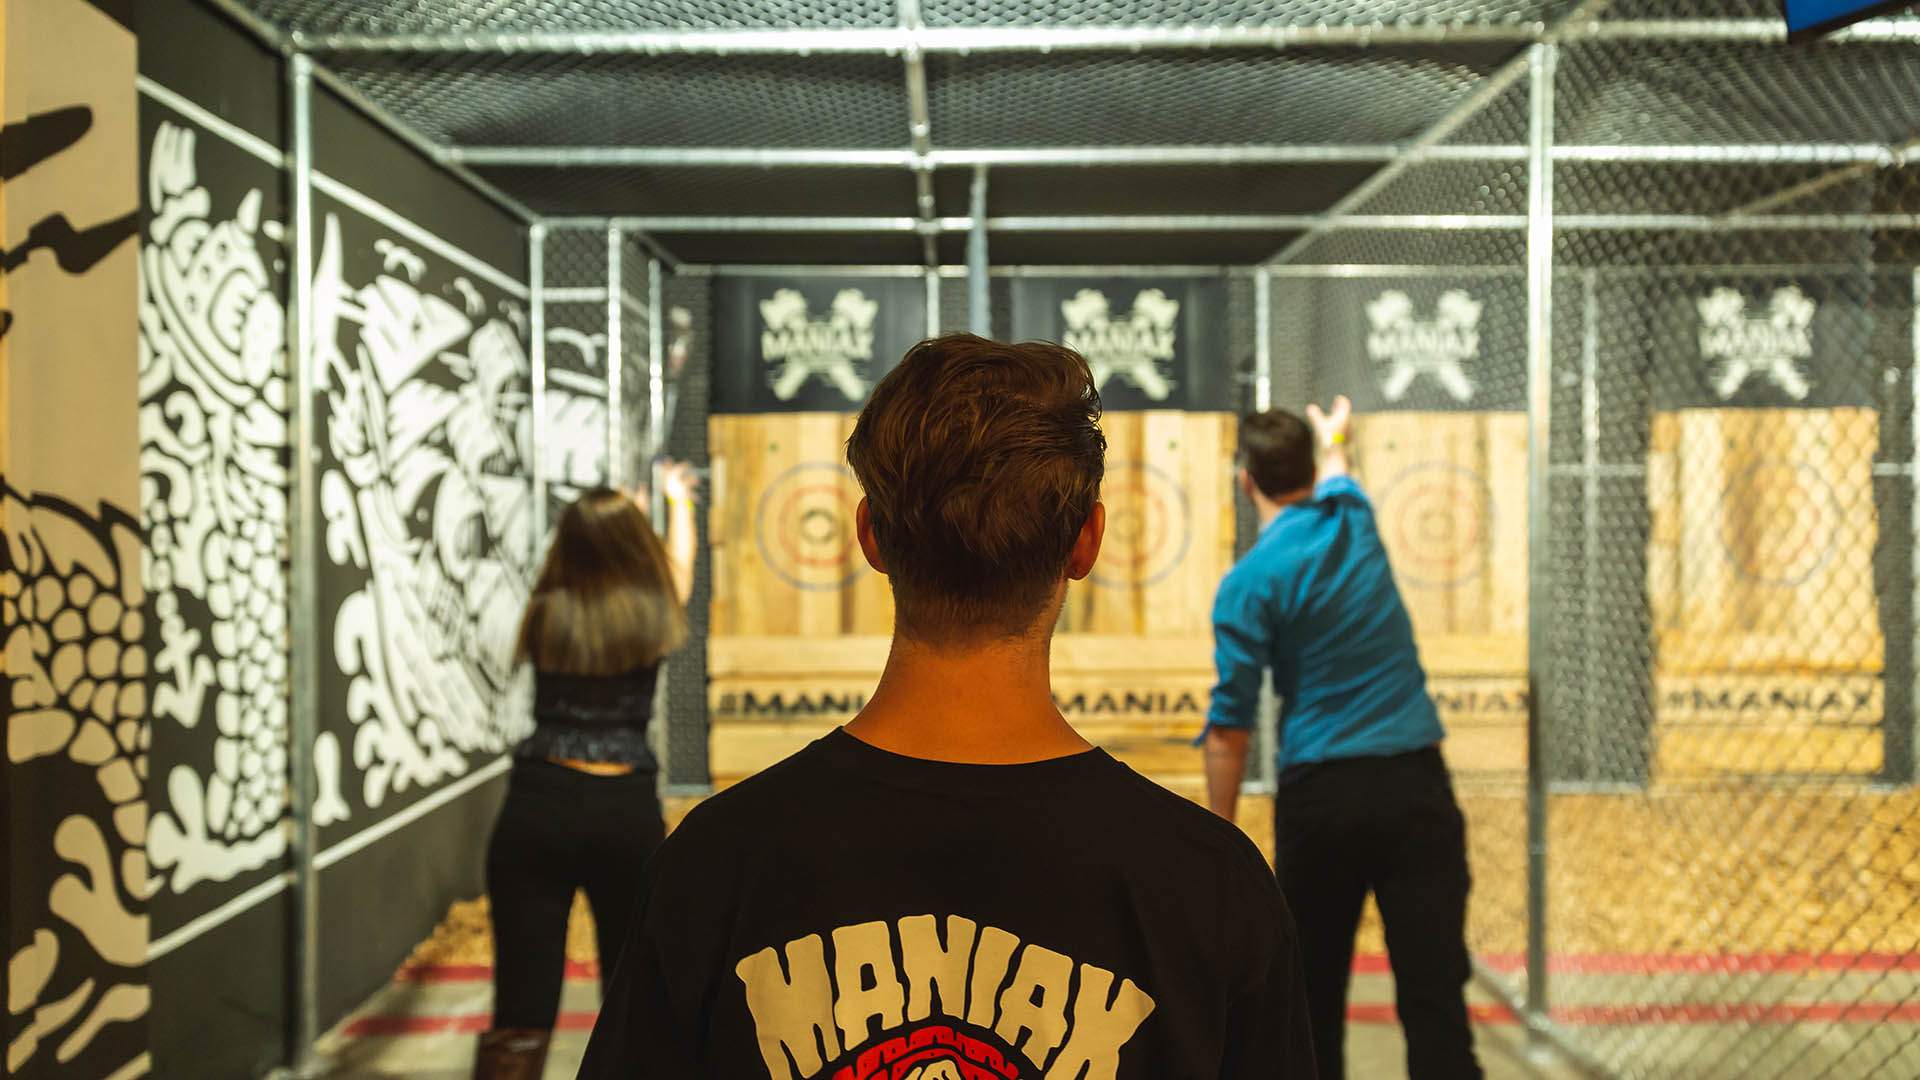 Maniax Is Opening Its Biggest Viking-Themed Axe-Throwing Joint Yet in Marrickville Next Month